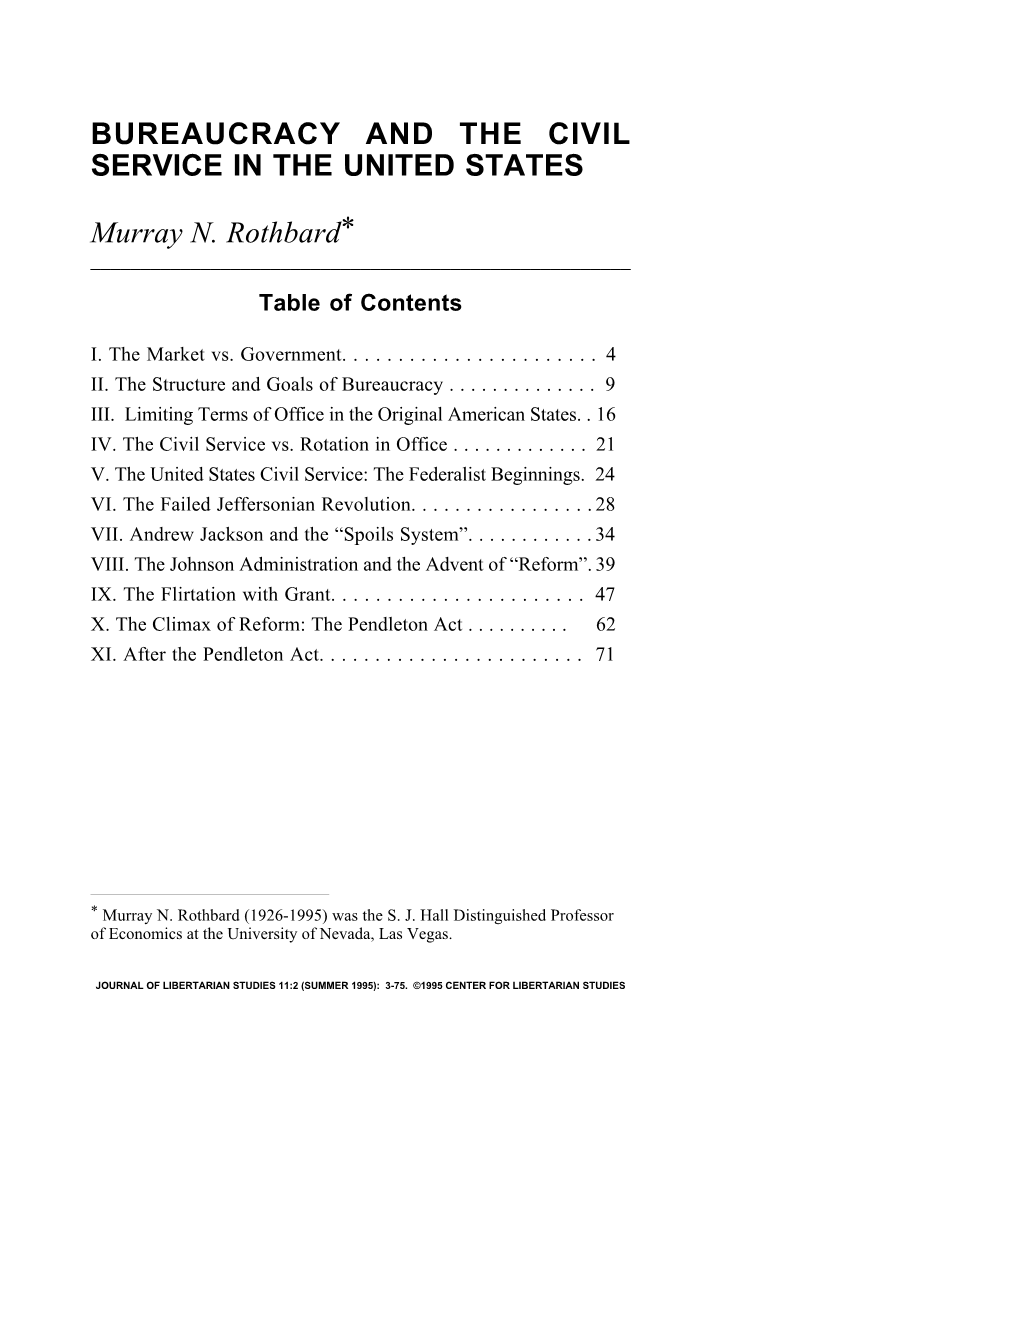 Bureaucracy and the Civil Service in the United States